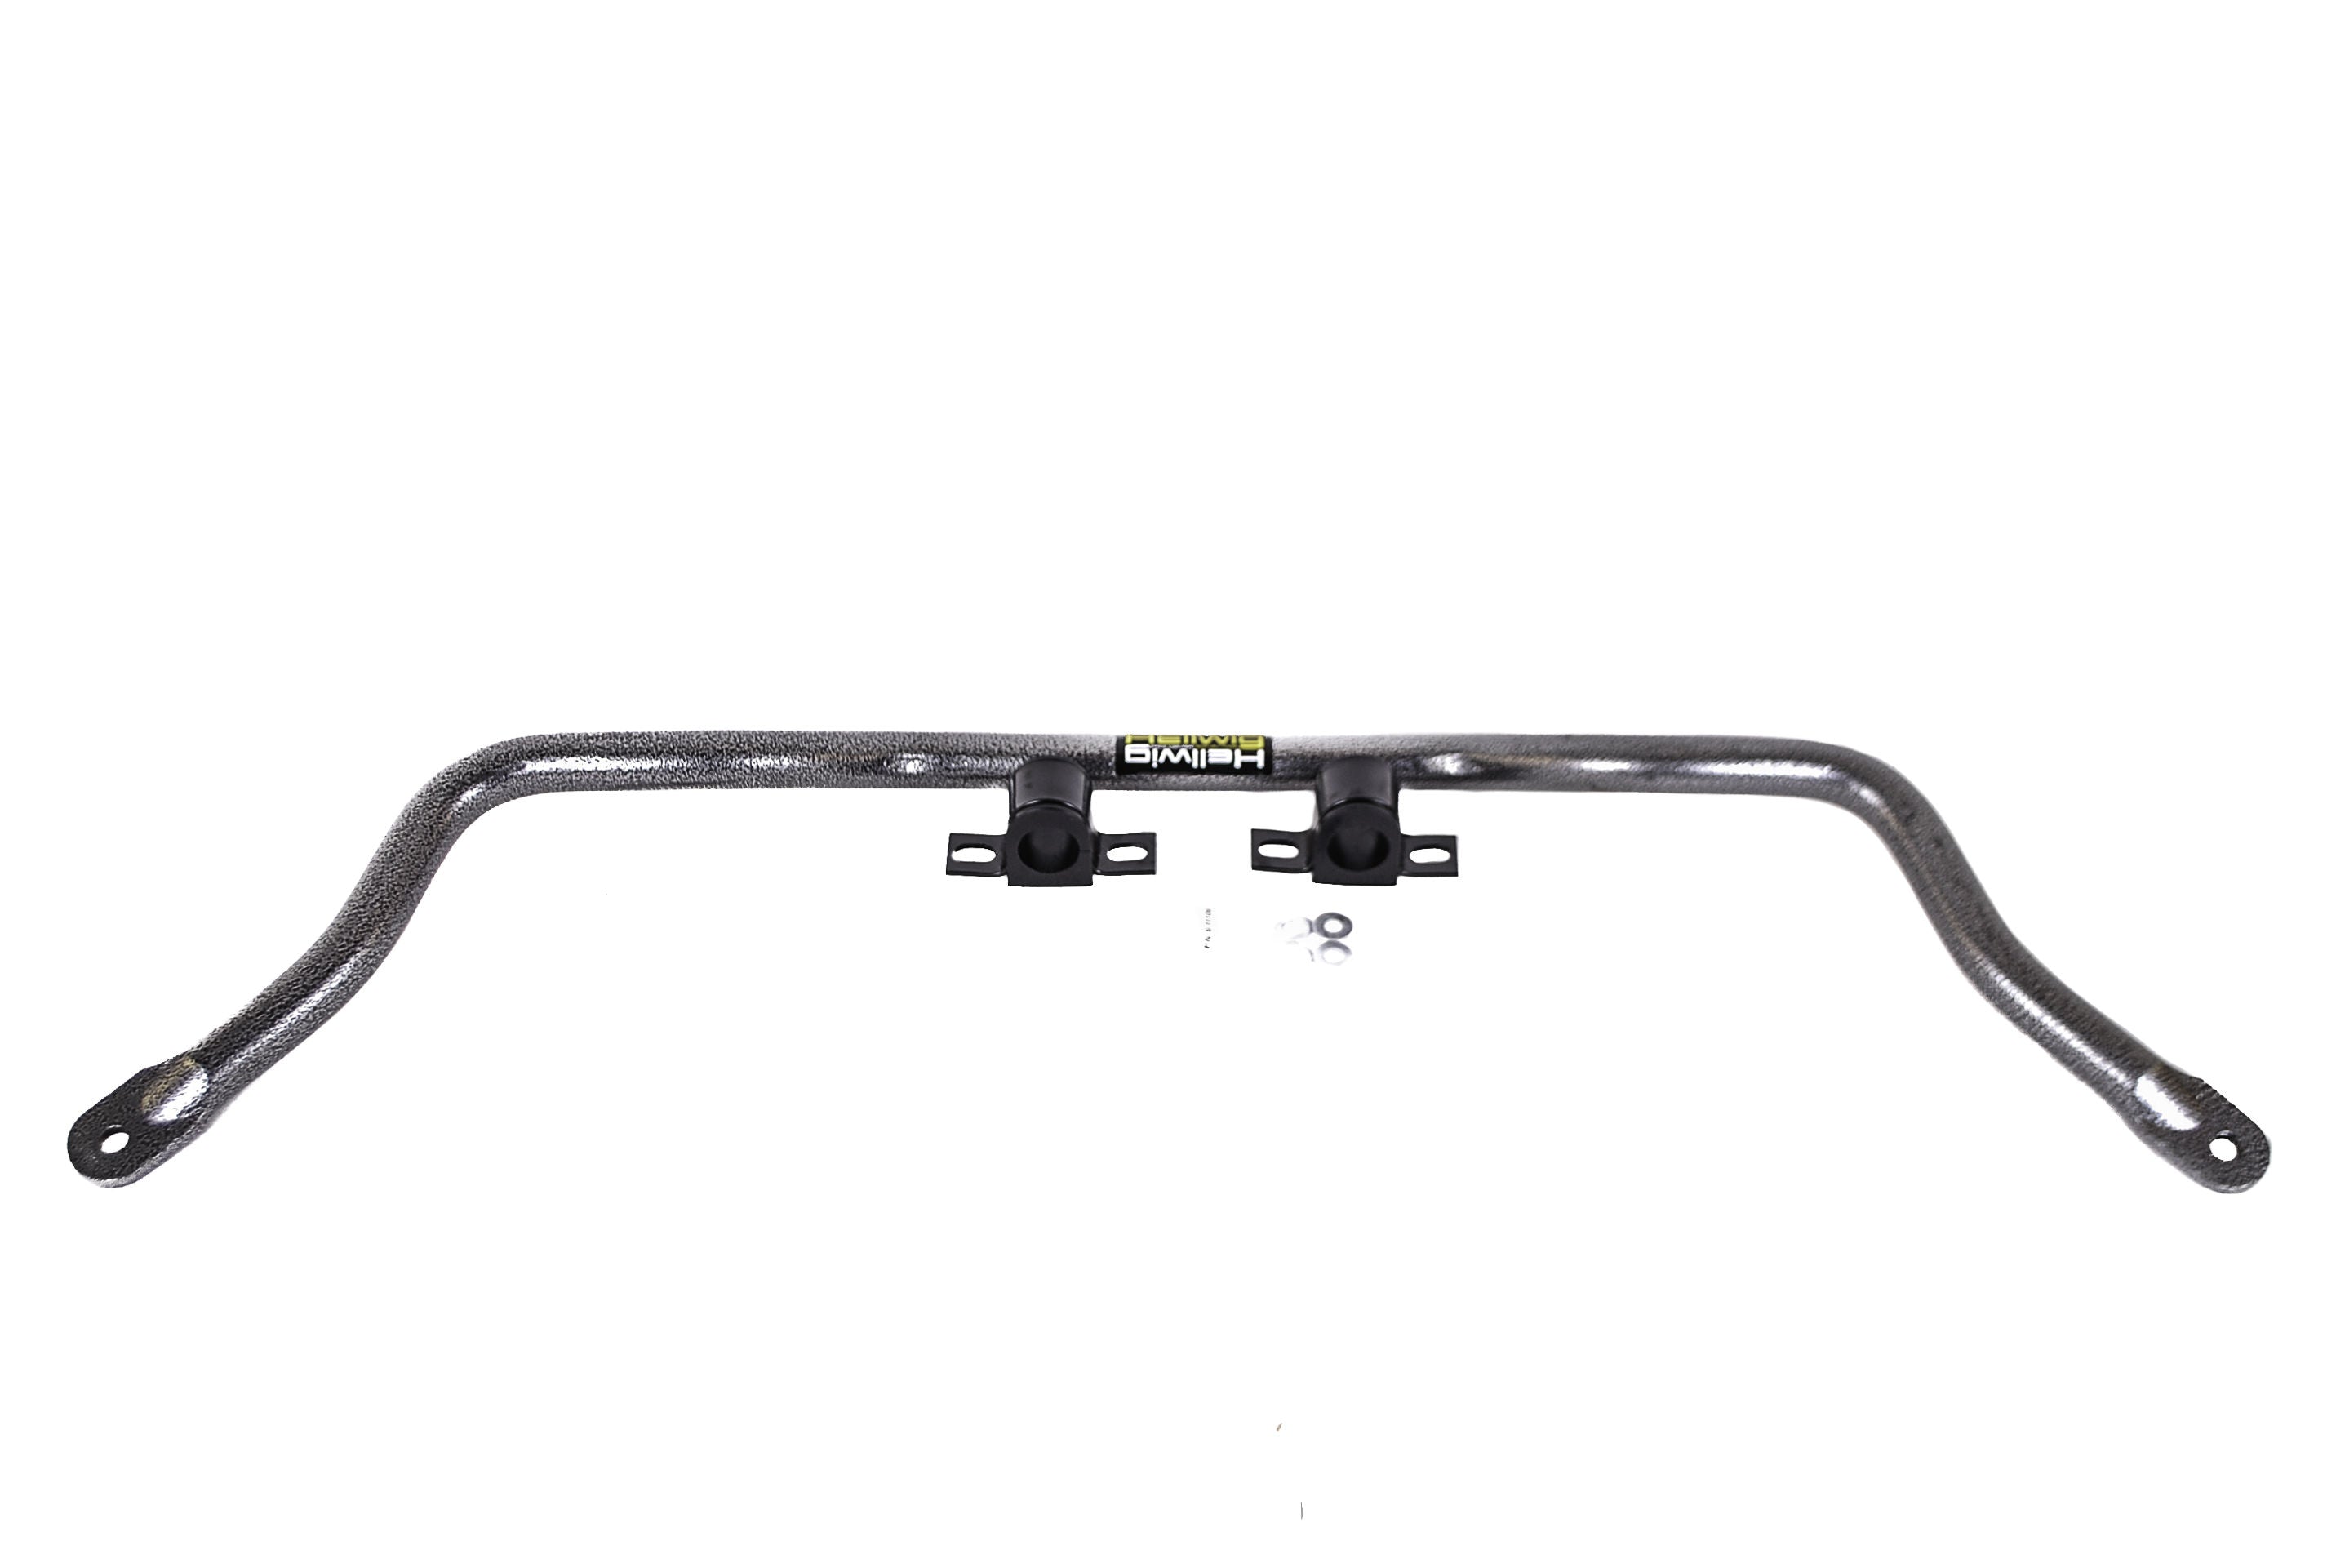 Hellwig 7704 - Front Sway Bar Kit for Ford F-150 2WD/4WD 09-20